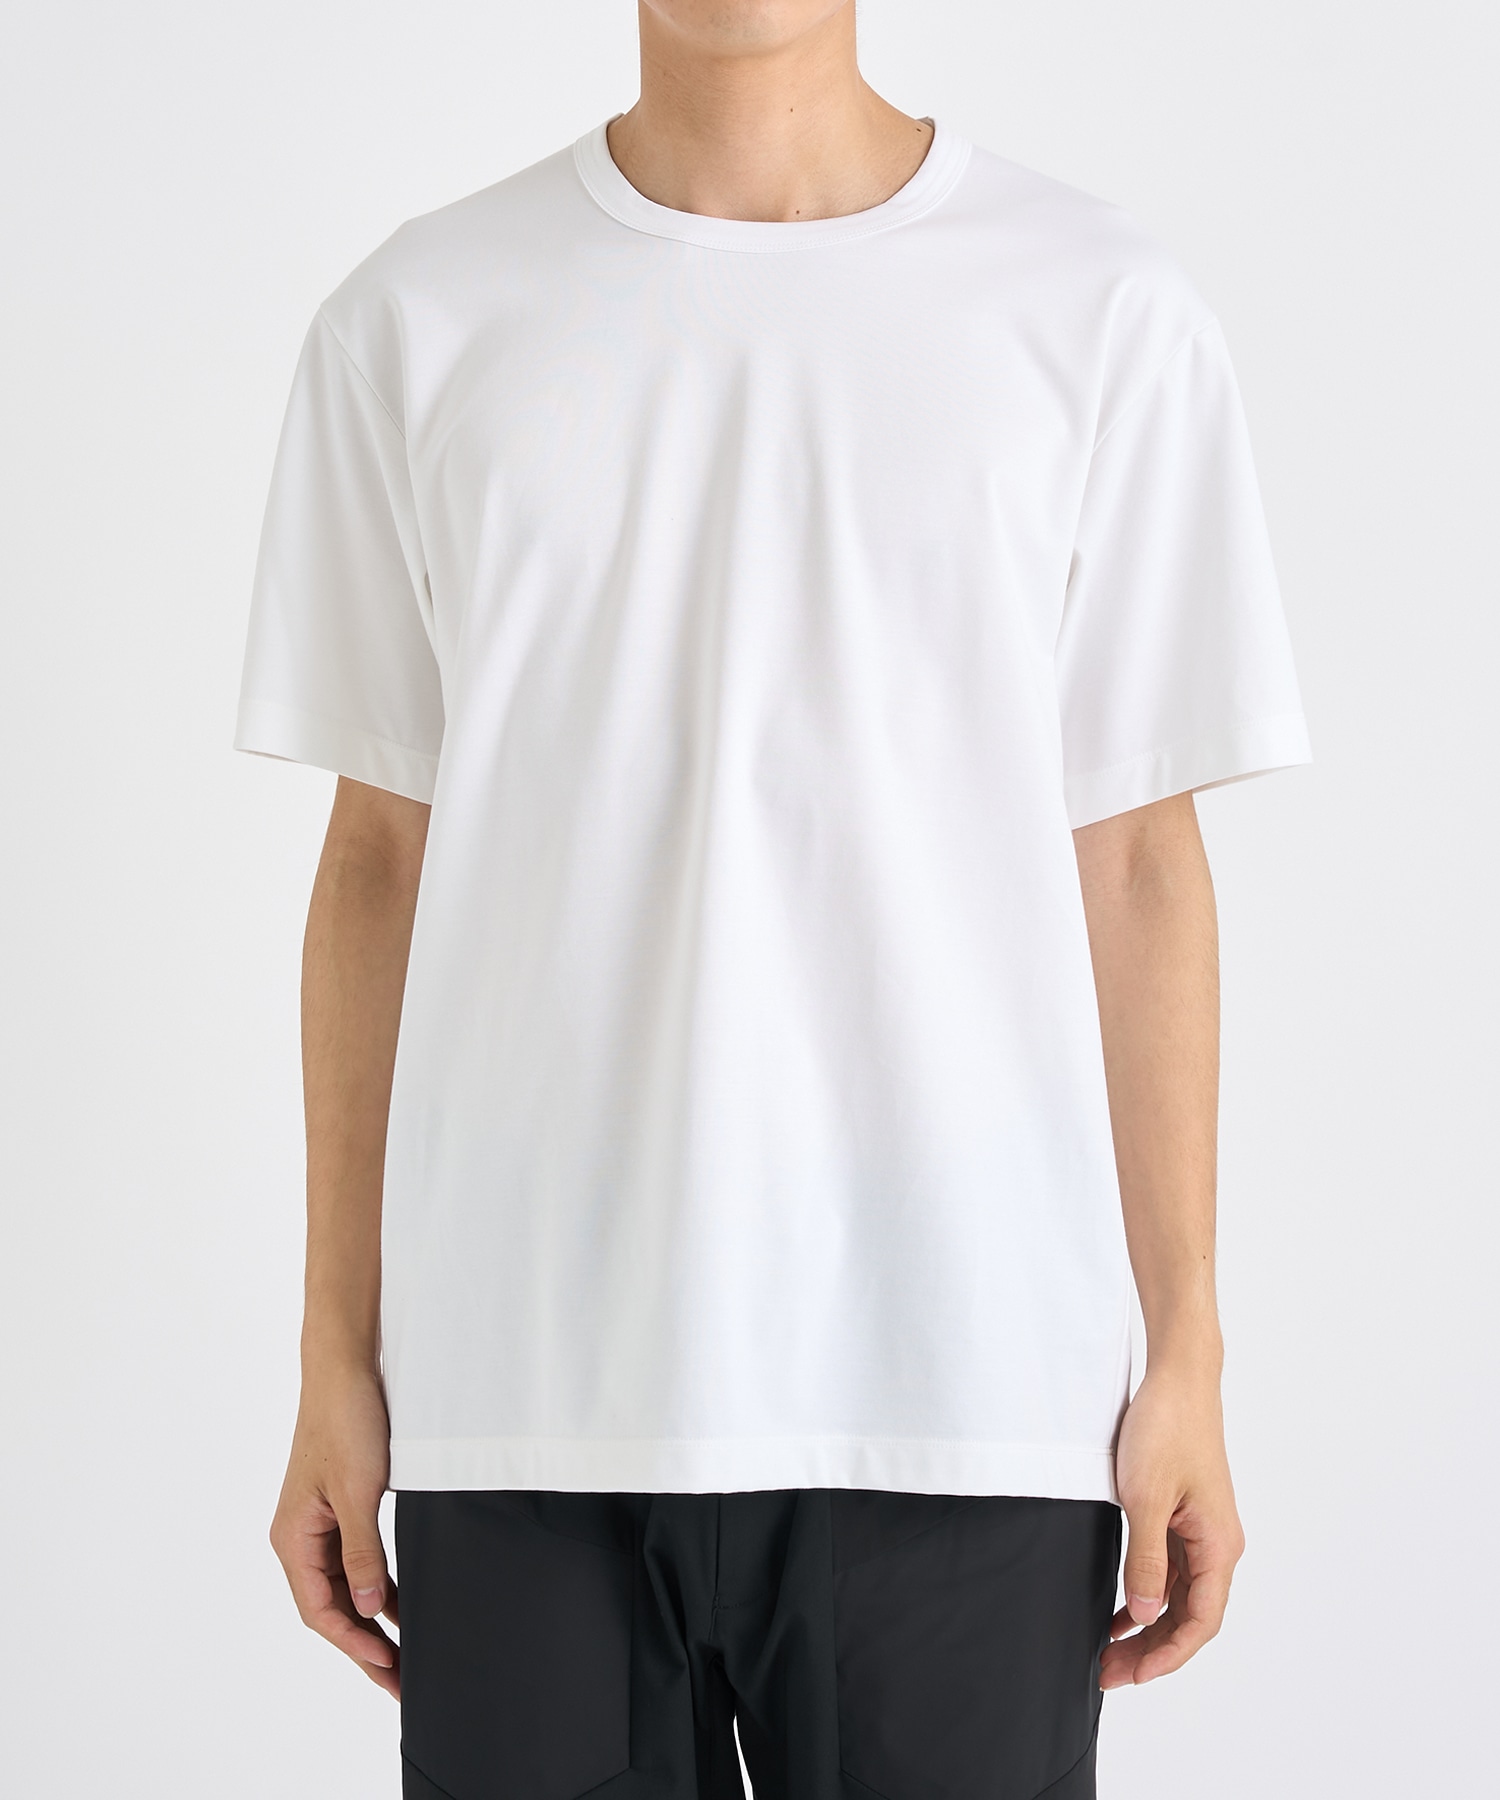 MENS/トップス/Tシャツ/カットソー(半袖)｜THE TOKYO ONLINE STORE